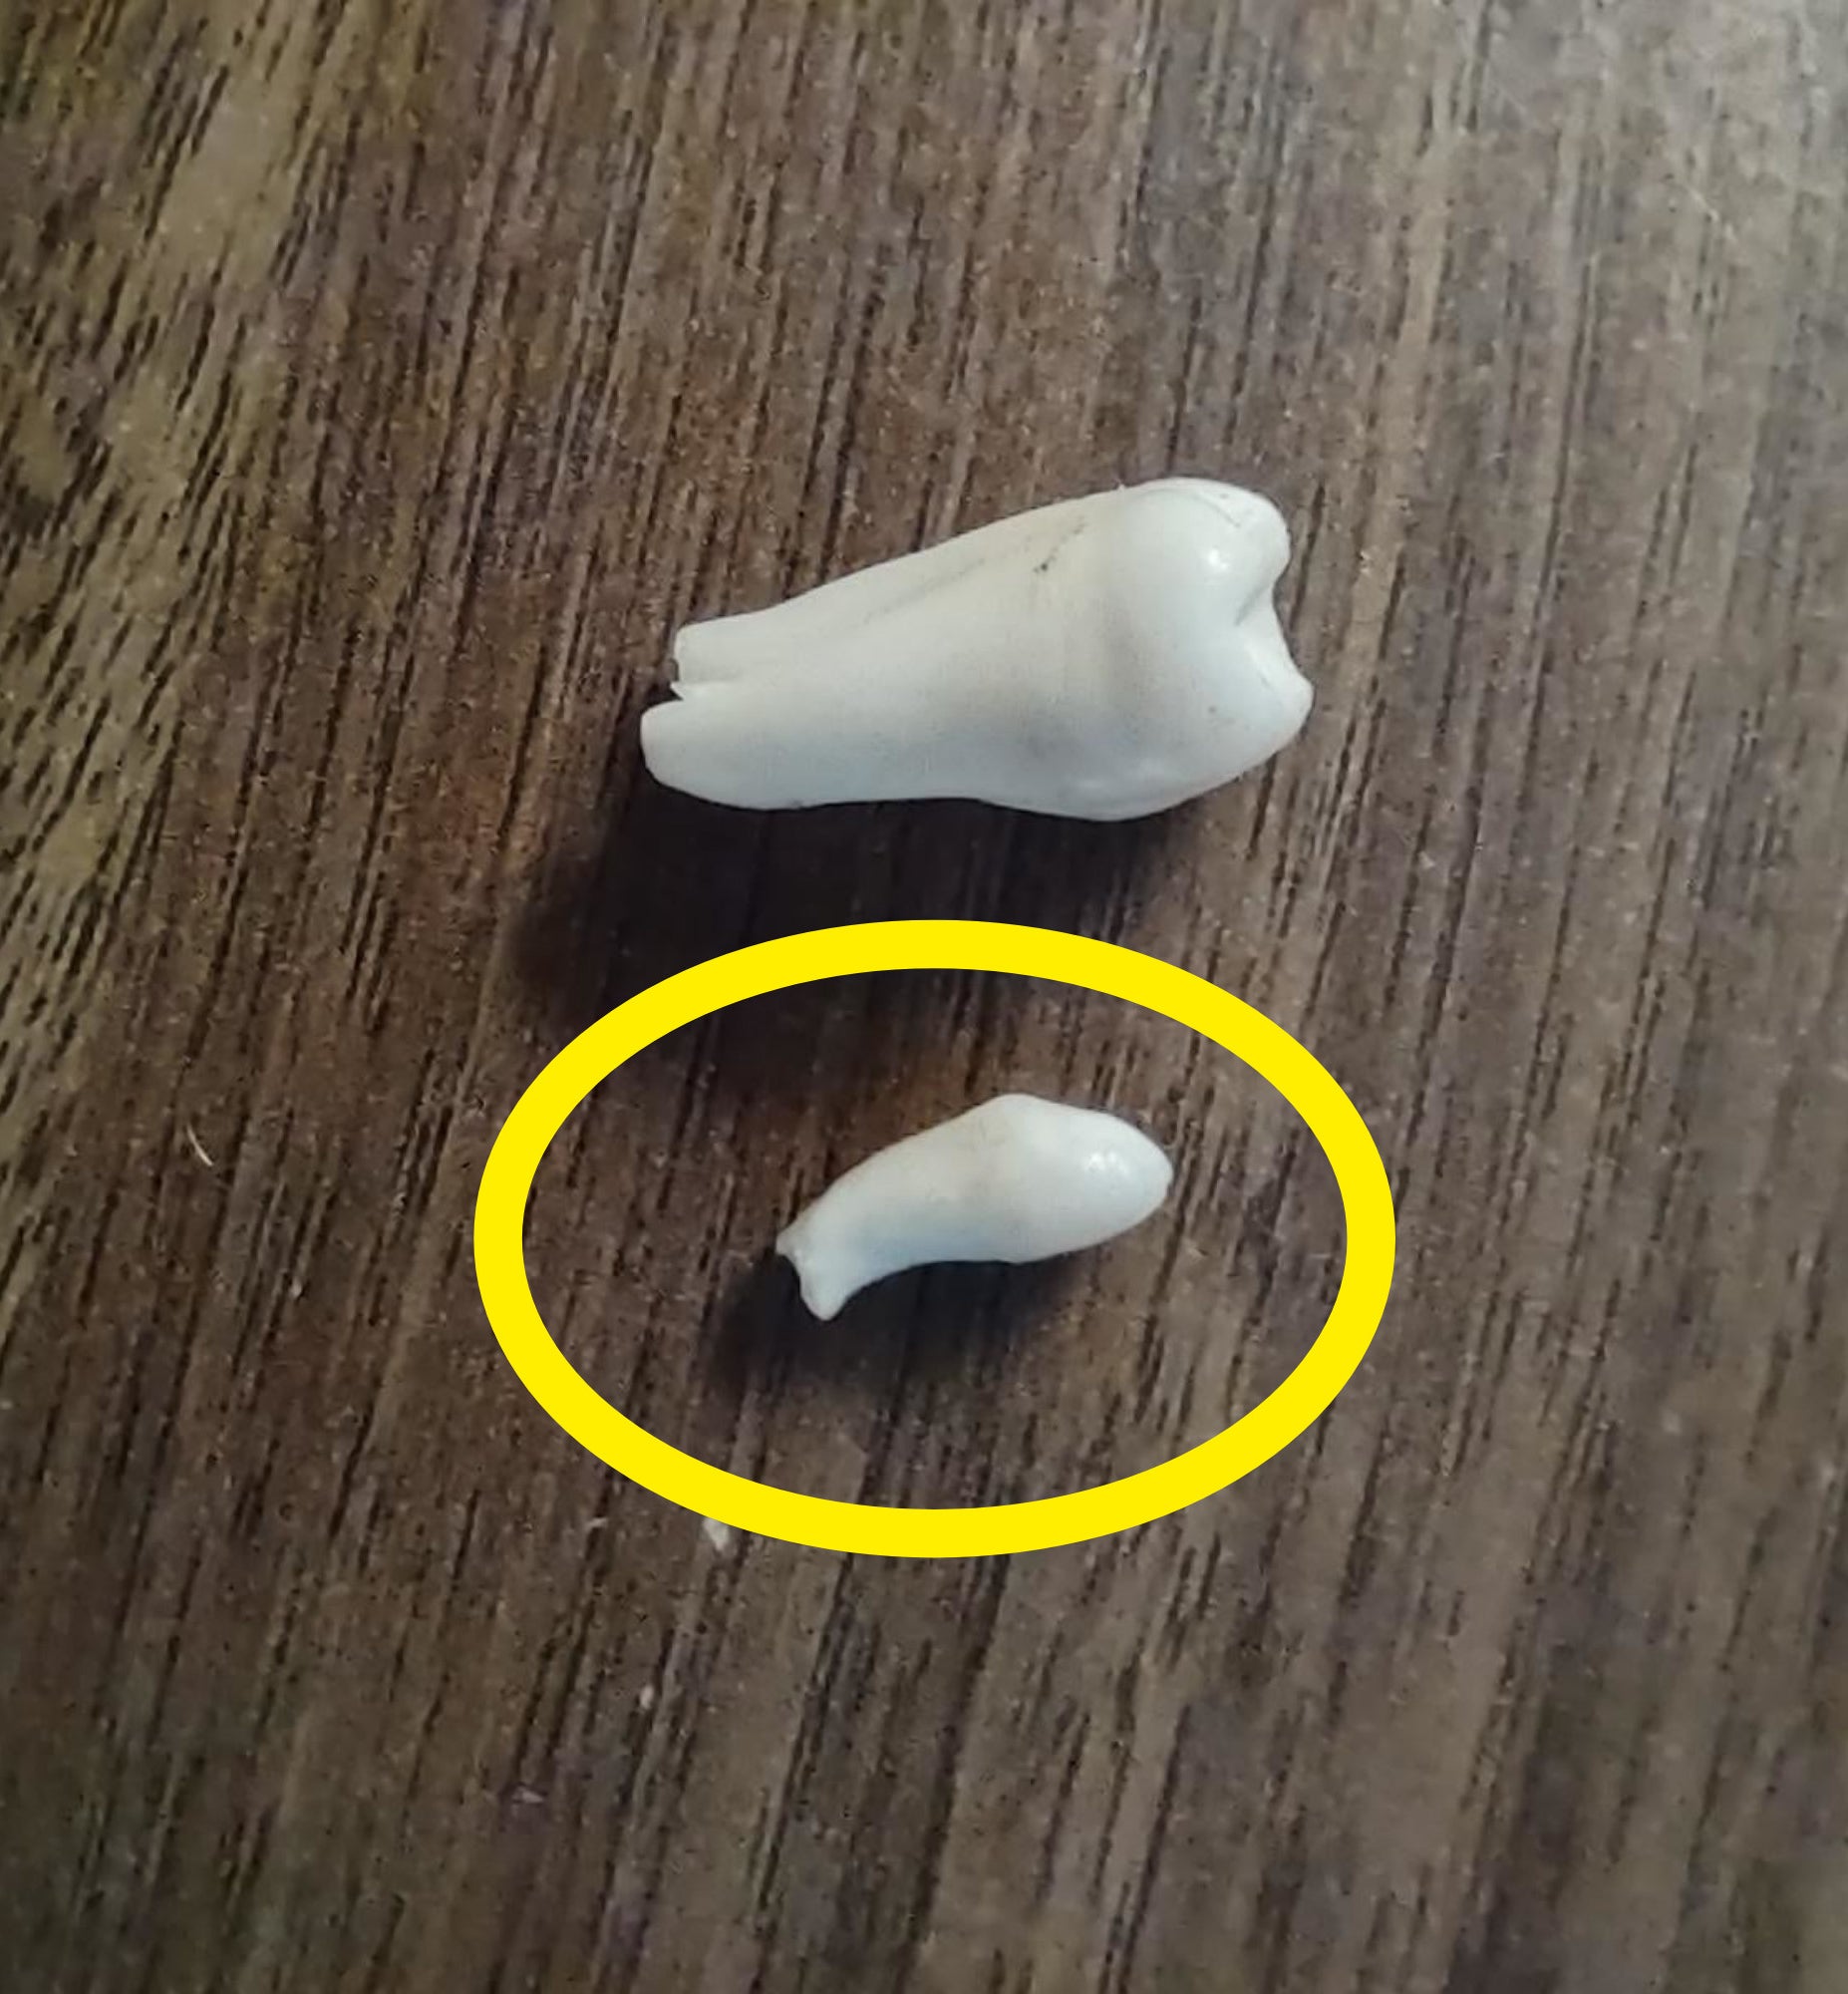 Two teeth side by side to show just how small one is